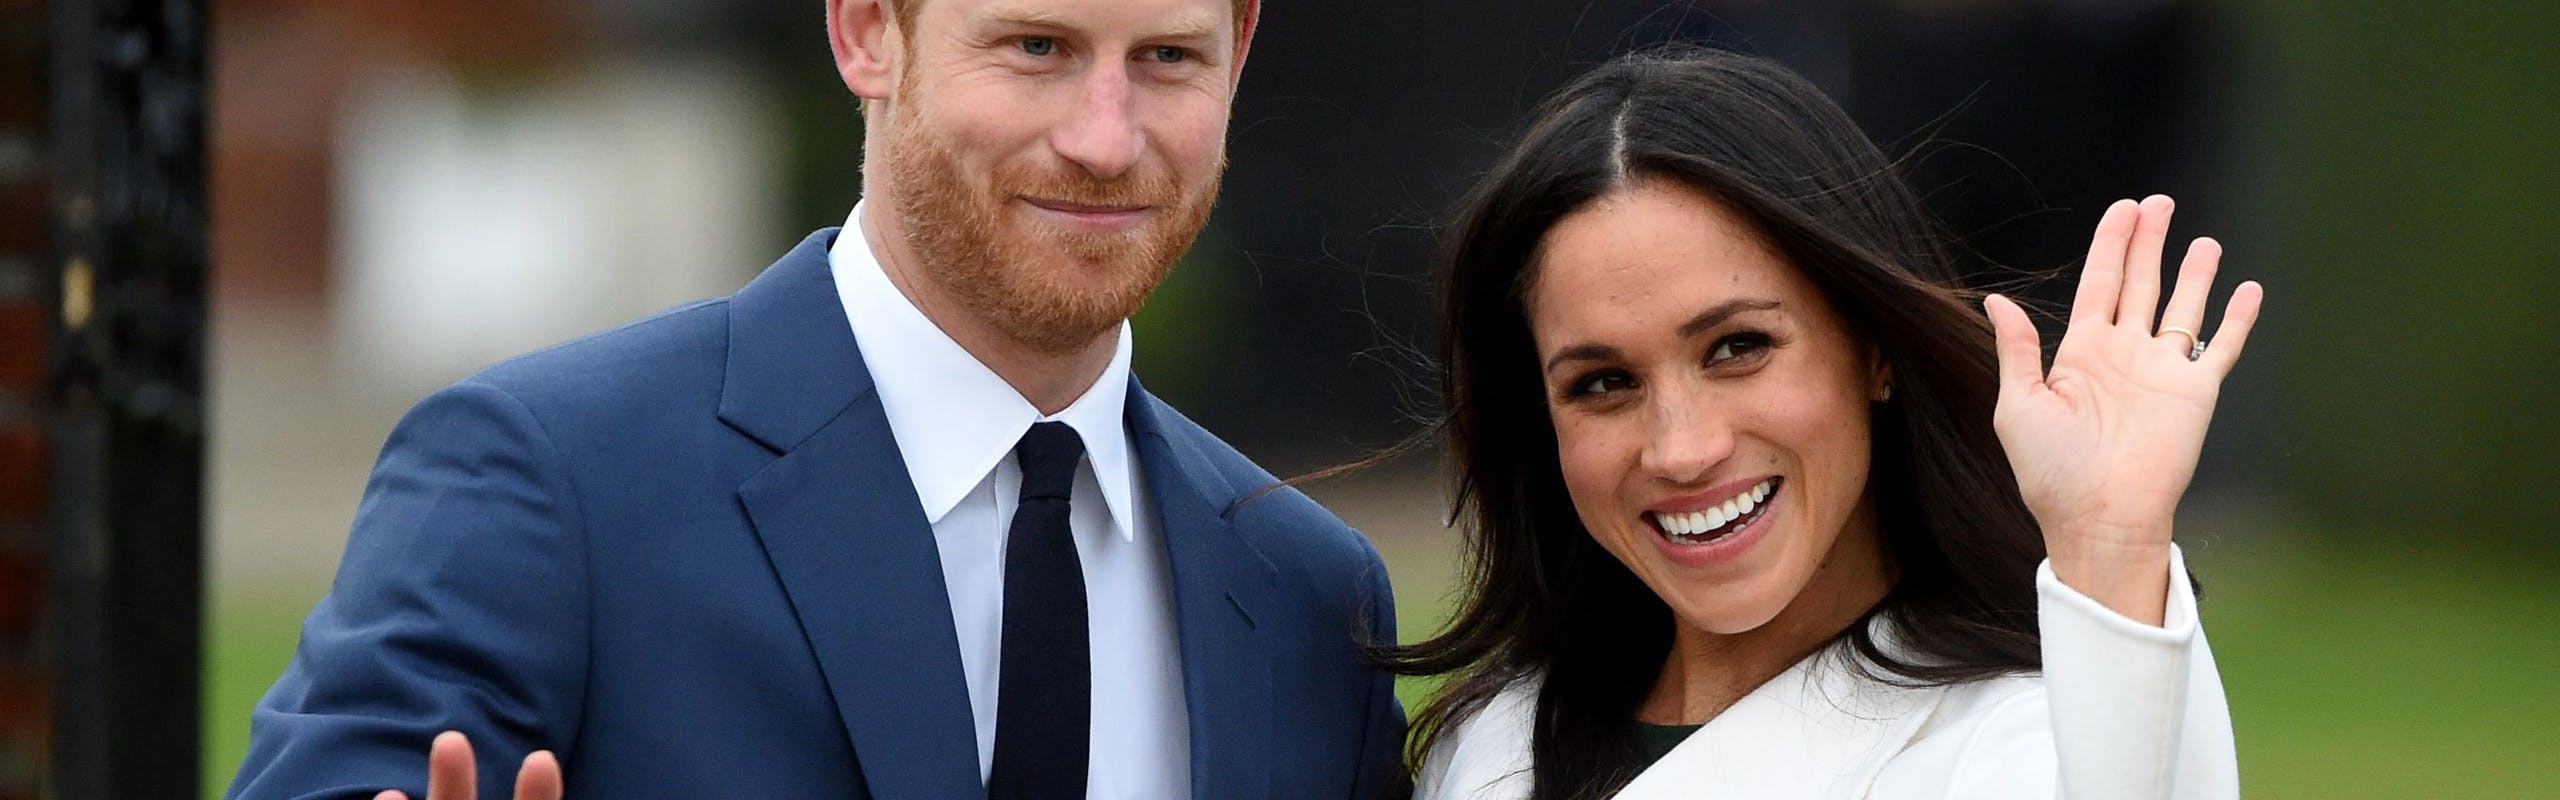 meghan markle and prince harry waving; prince harry naked pictures